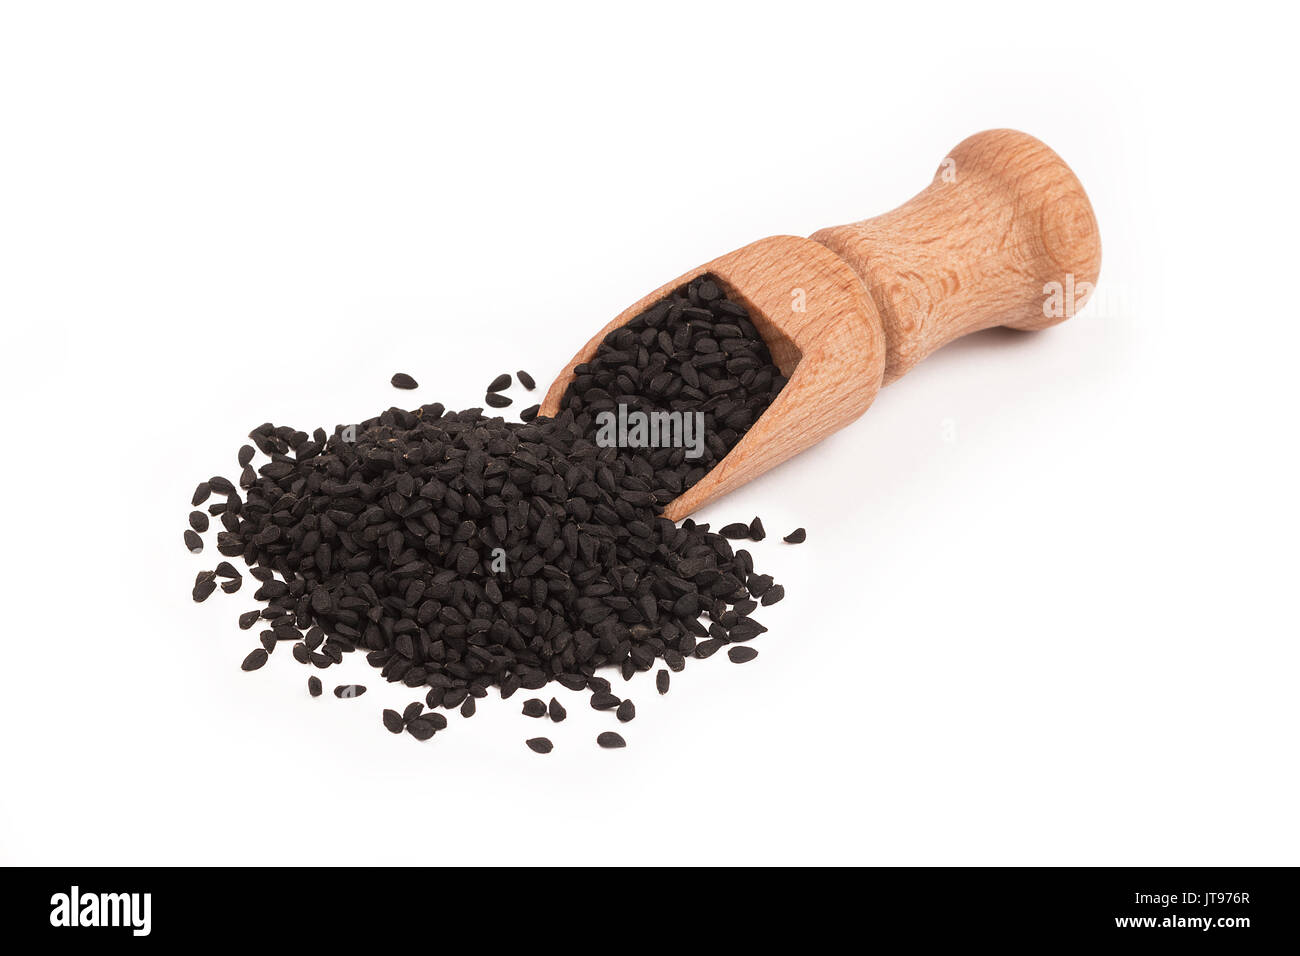 Black cumin seed in wooden scoop isolated on white background, Nigella sativa Stock Photo